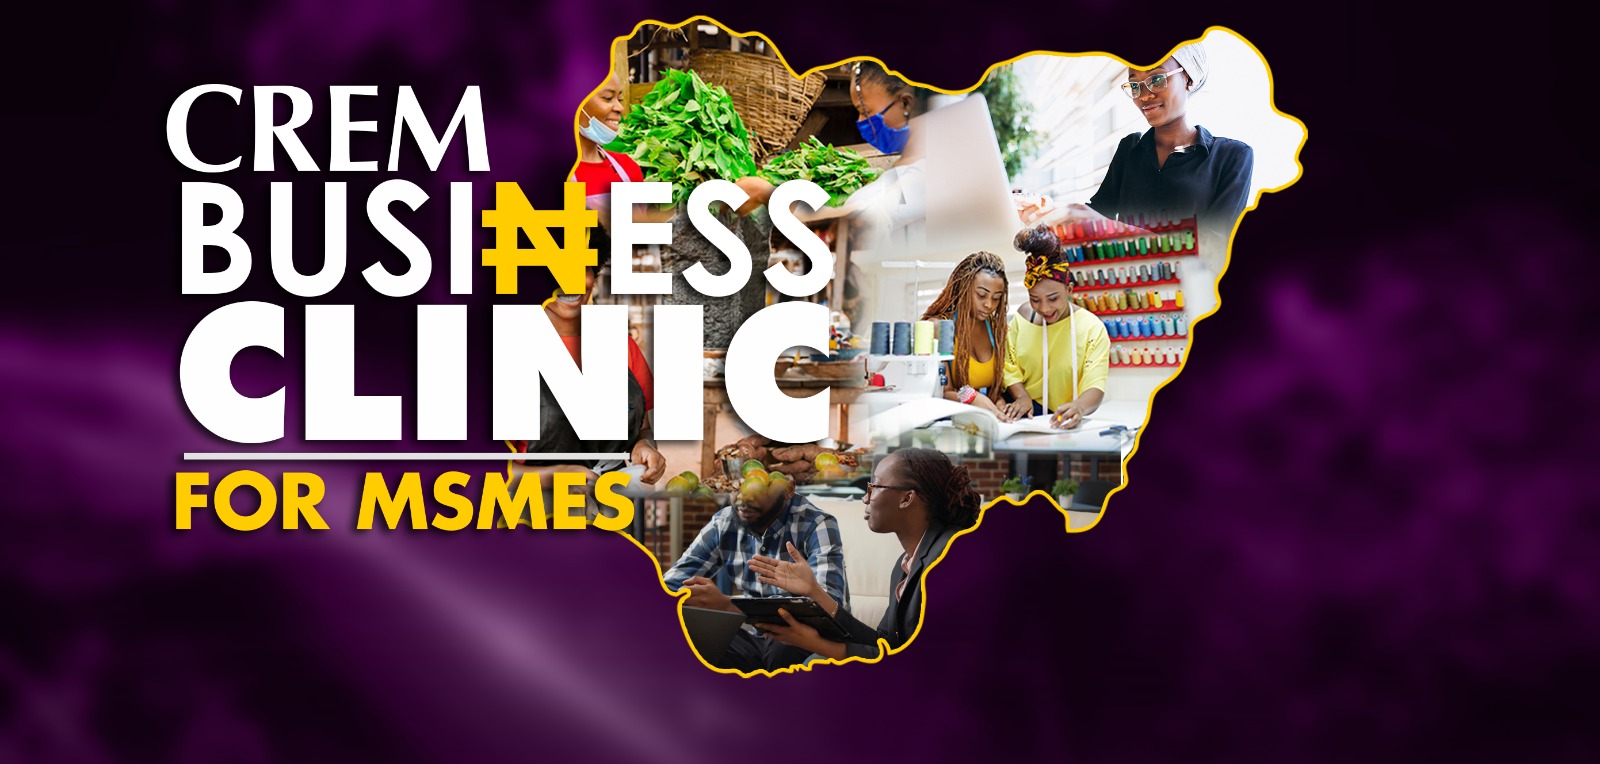 CREM's Business Clinic for MSMEs